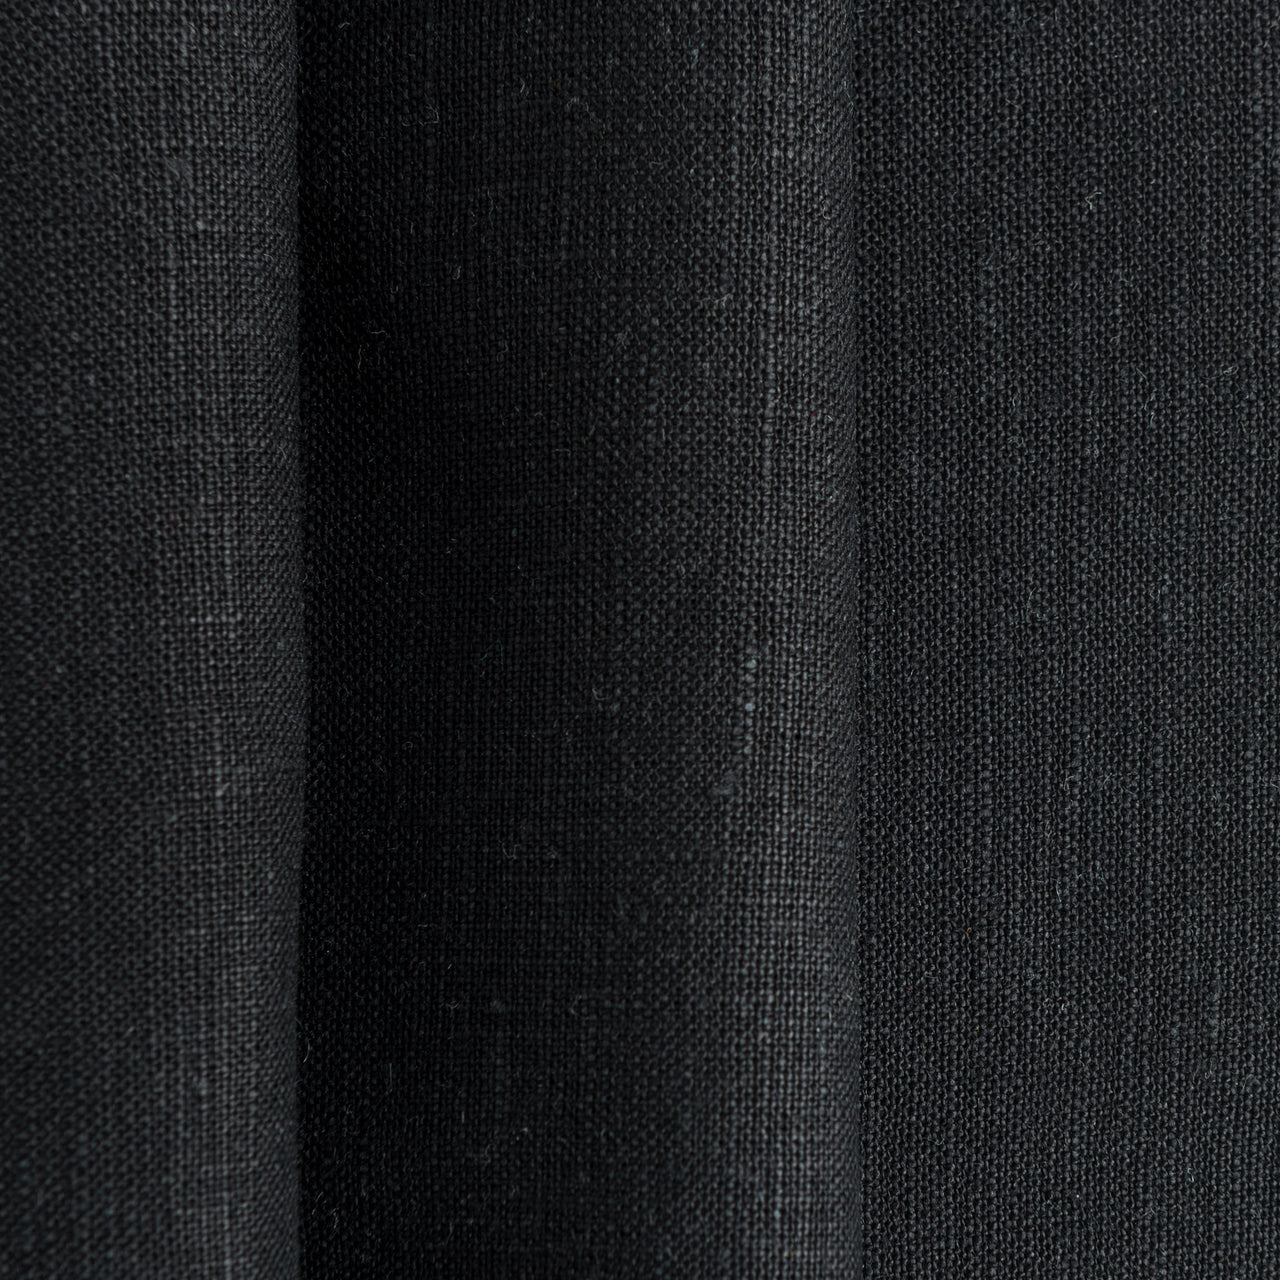 Black Linen Fabric by the Yard - 100% French Natural - Width 52”- 106”